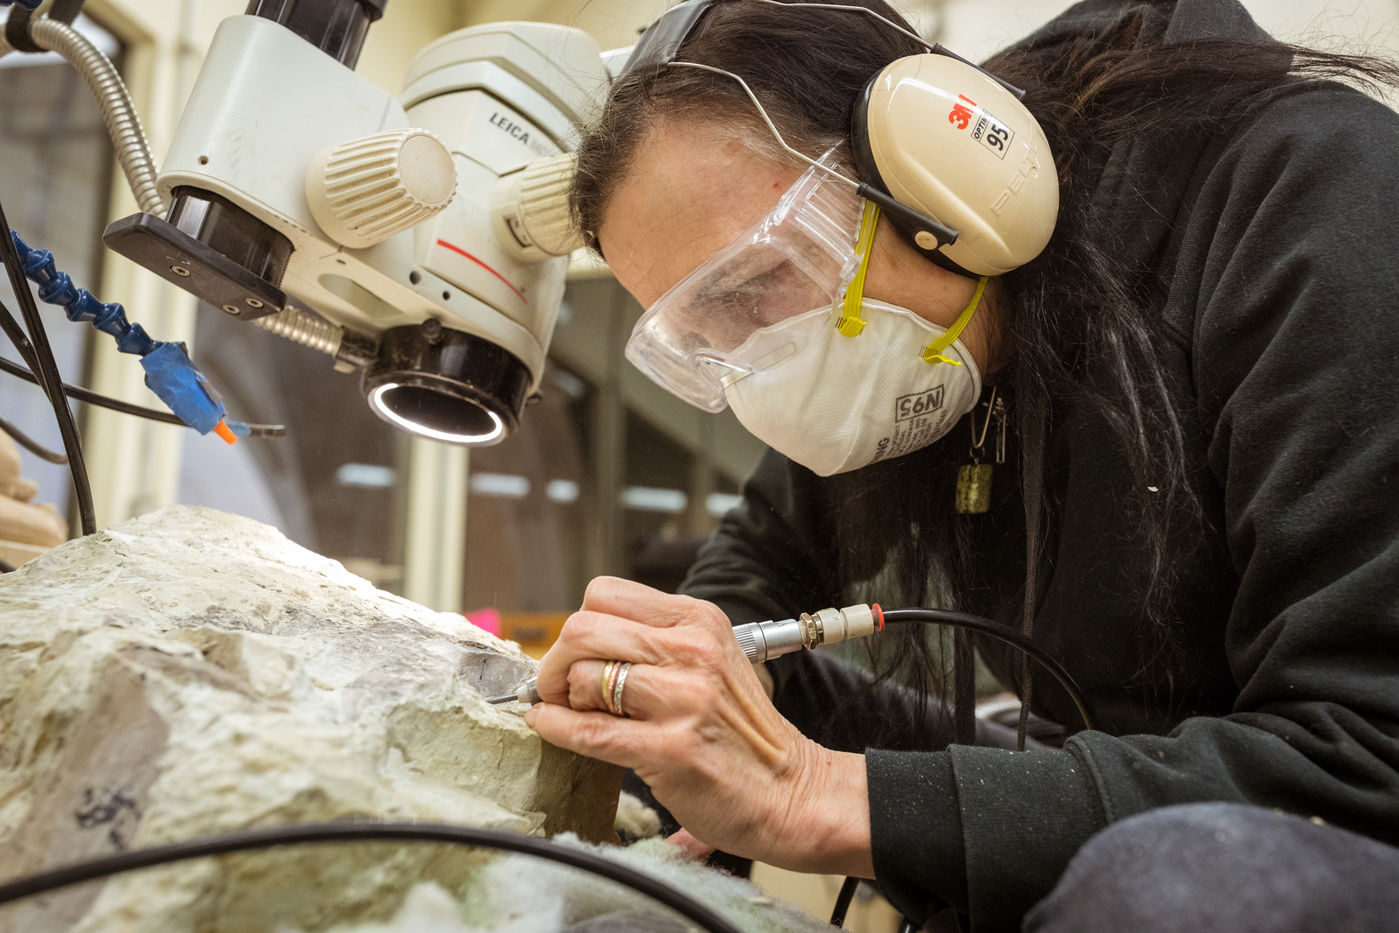 A special exhaust system protects preparators in the Fossil Prep Lab by removing rock dust created during fossil preparation.